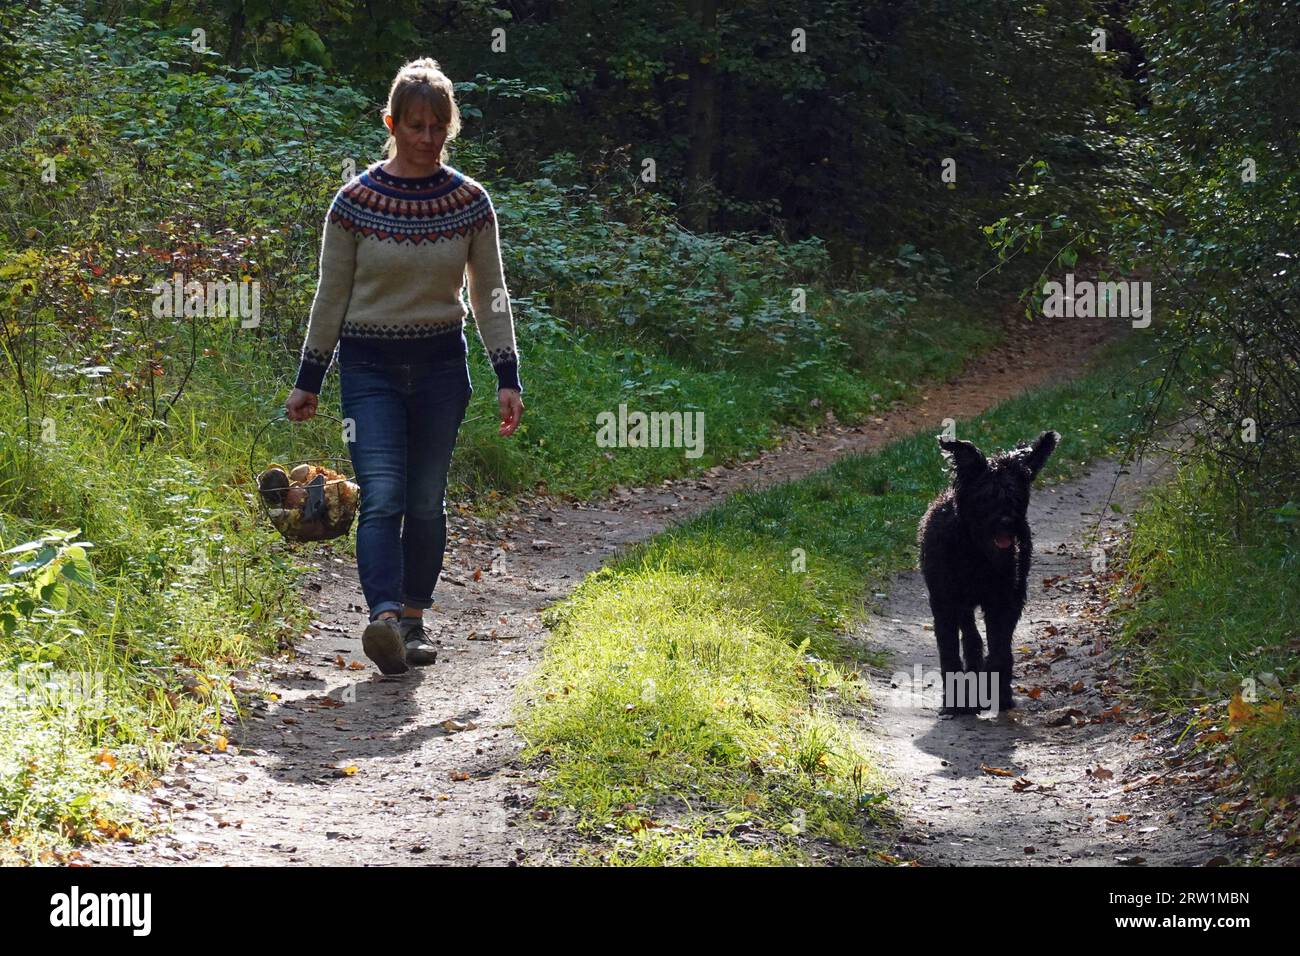 10.10.2022, Germany, Brandenburg, Dranse - Woman walking along a forest path with a basket of mushrooms with her dog. 00S221010D092CAROEX.JPG [MODEL R Stock Photo